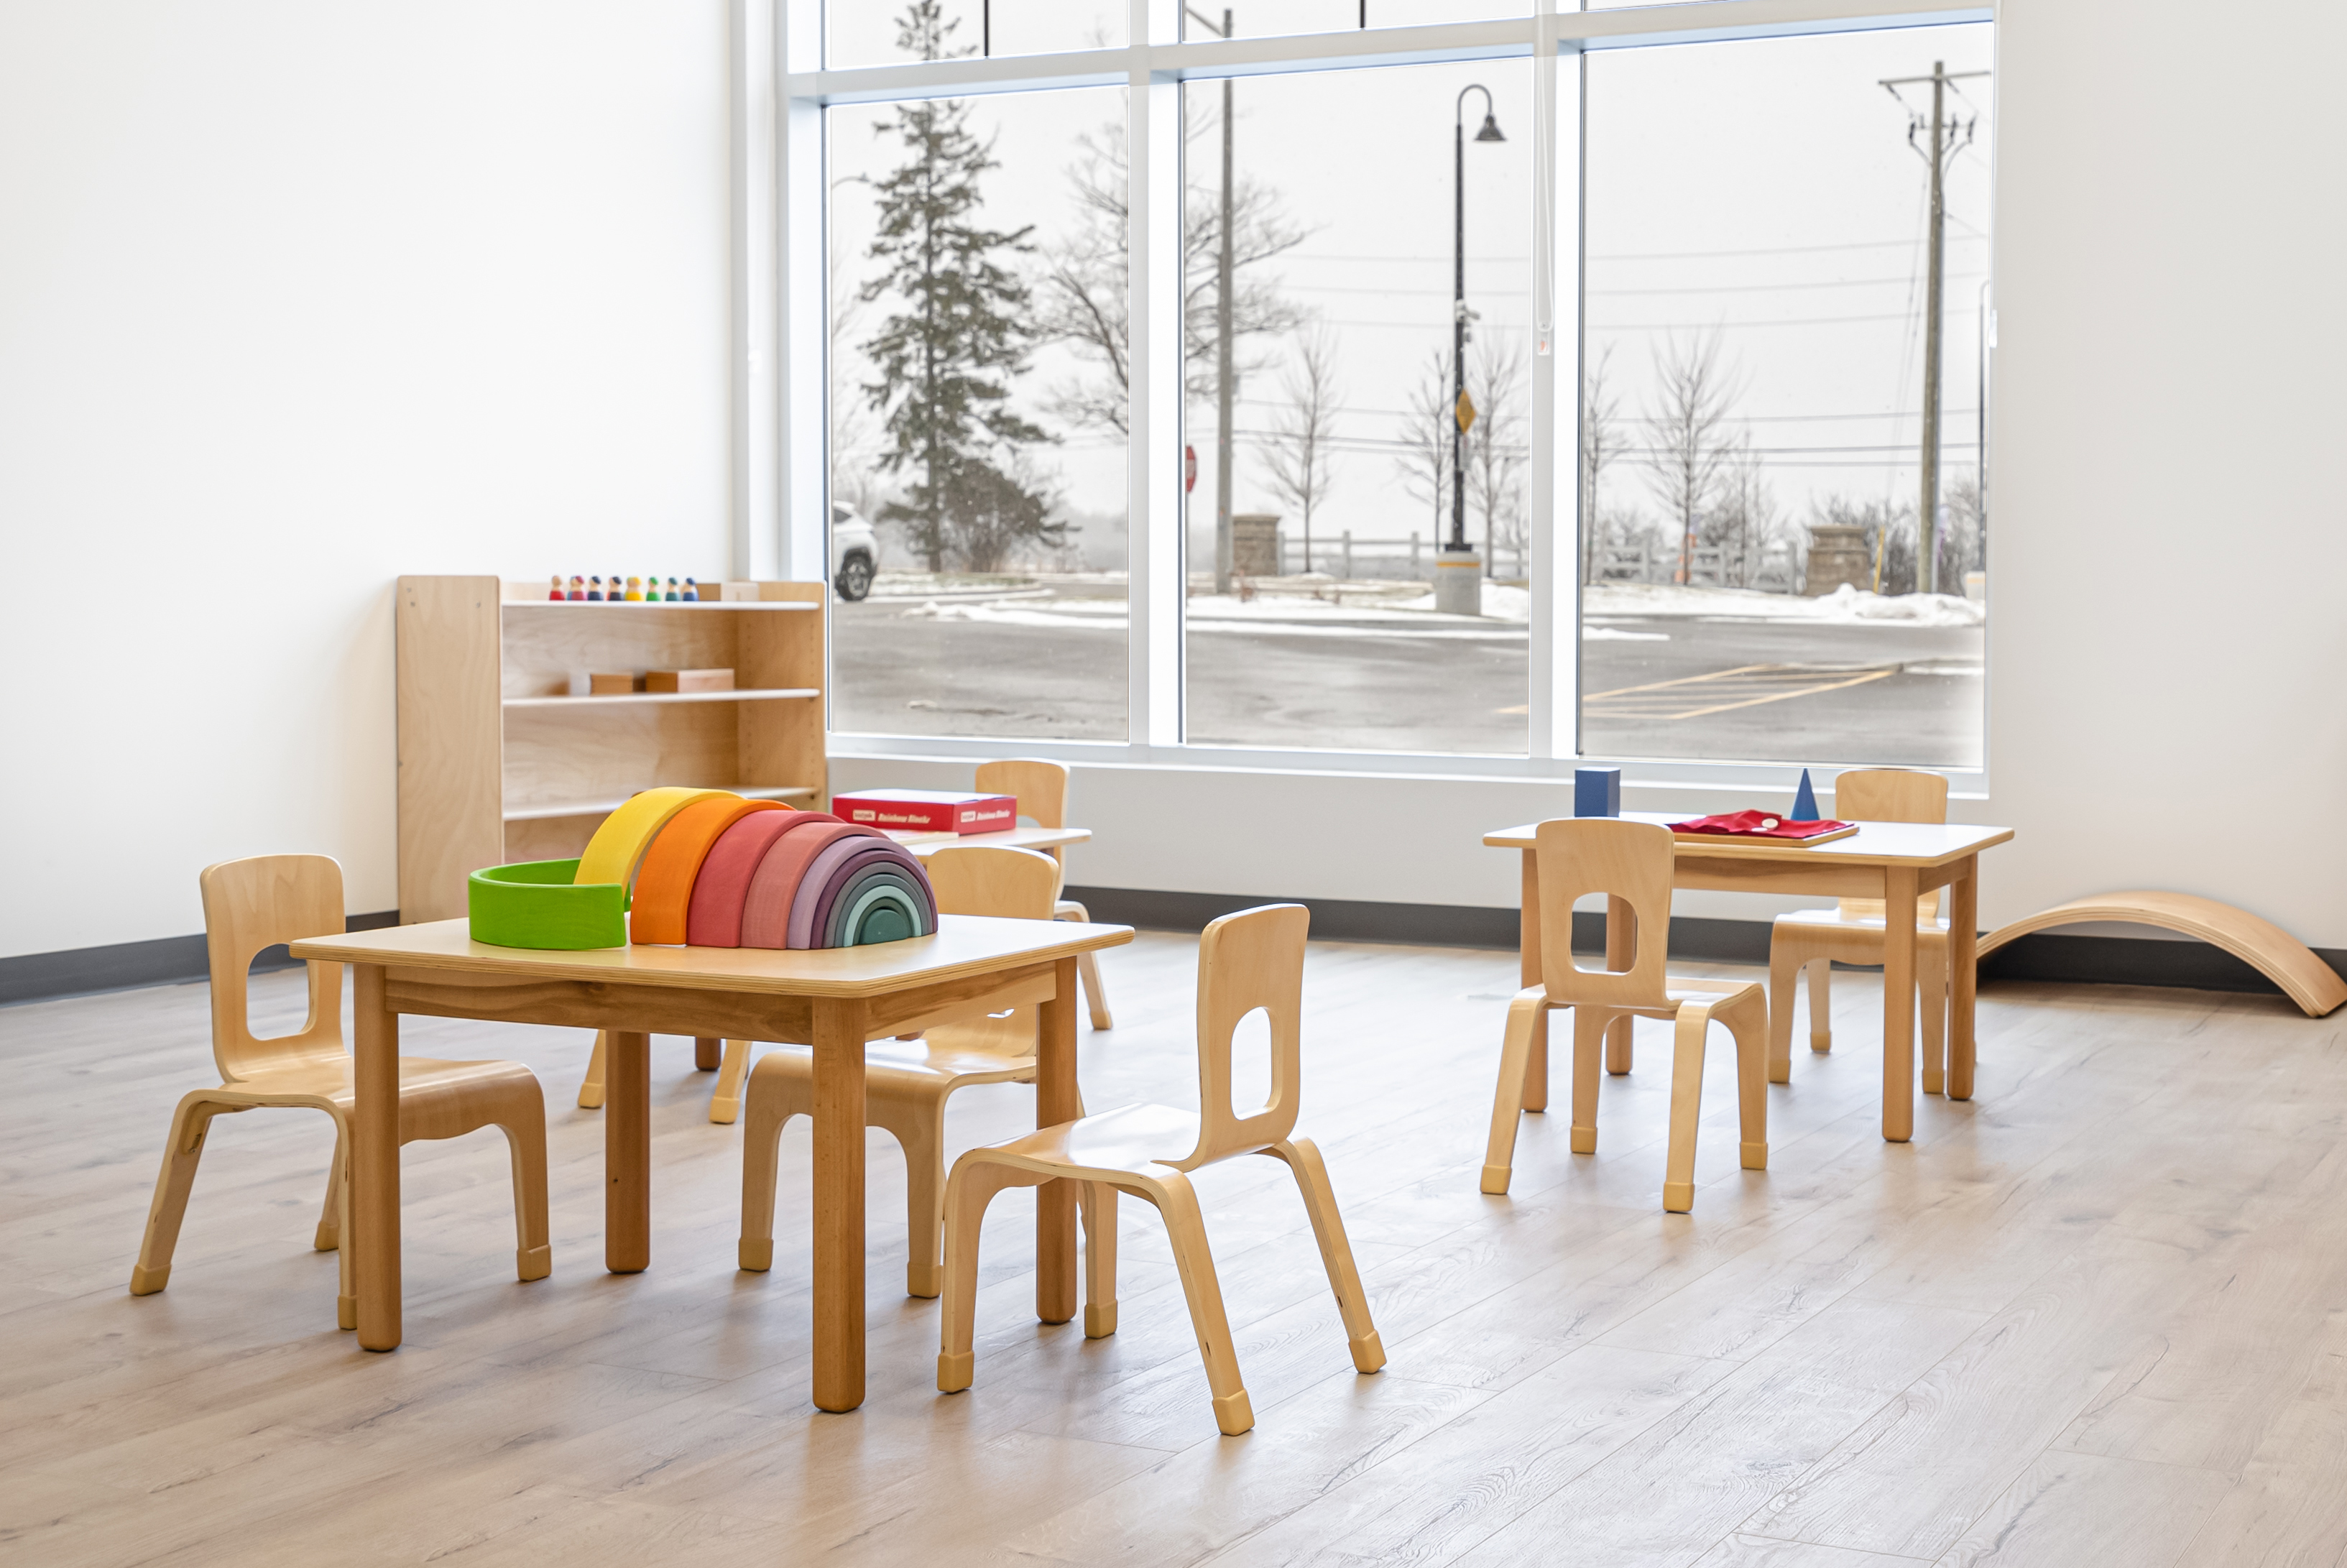 iKids Montessori Academy strive to deliver stimulating learning experiences in a safe environment that enhances children’s physical, mental, emotional, and intellectual development in our newly renovated classroom for kids in Richmond Hill and Markham.